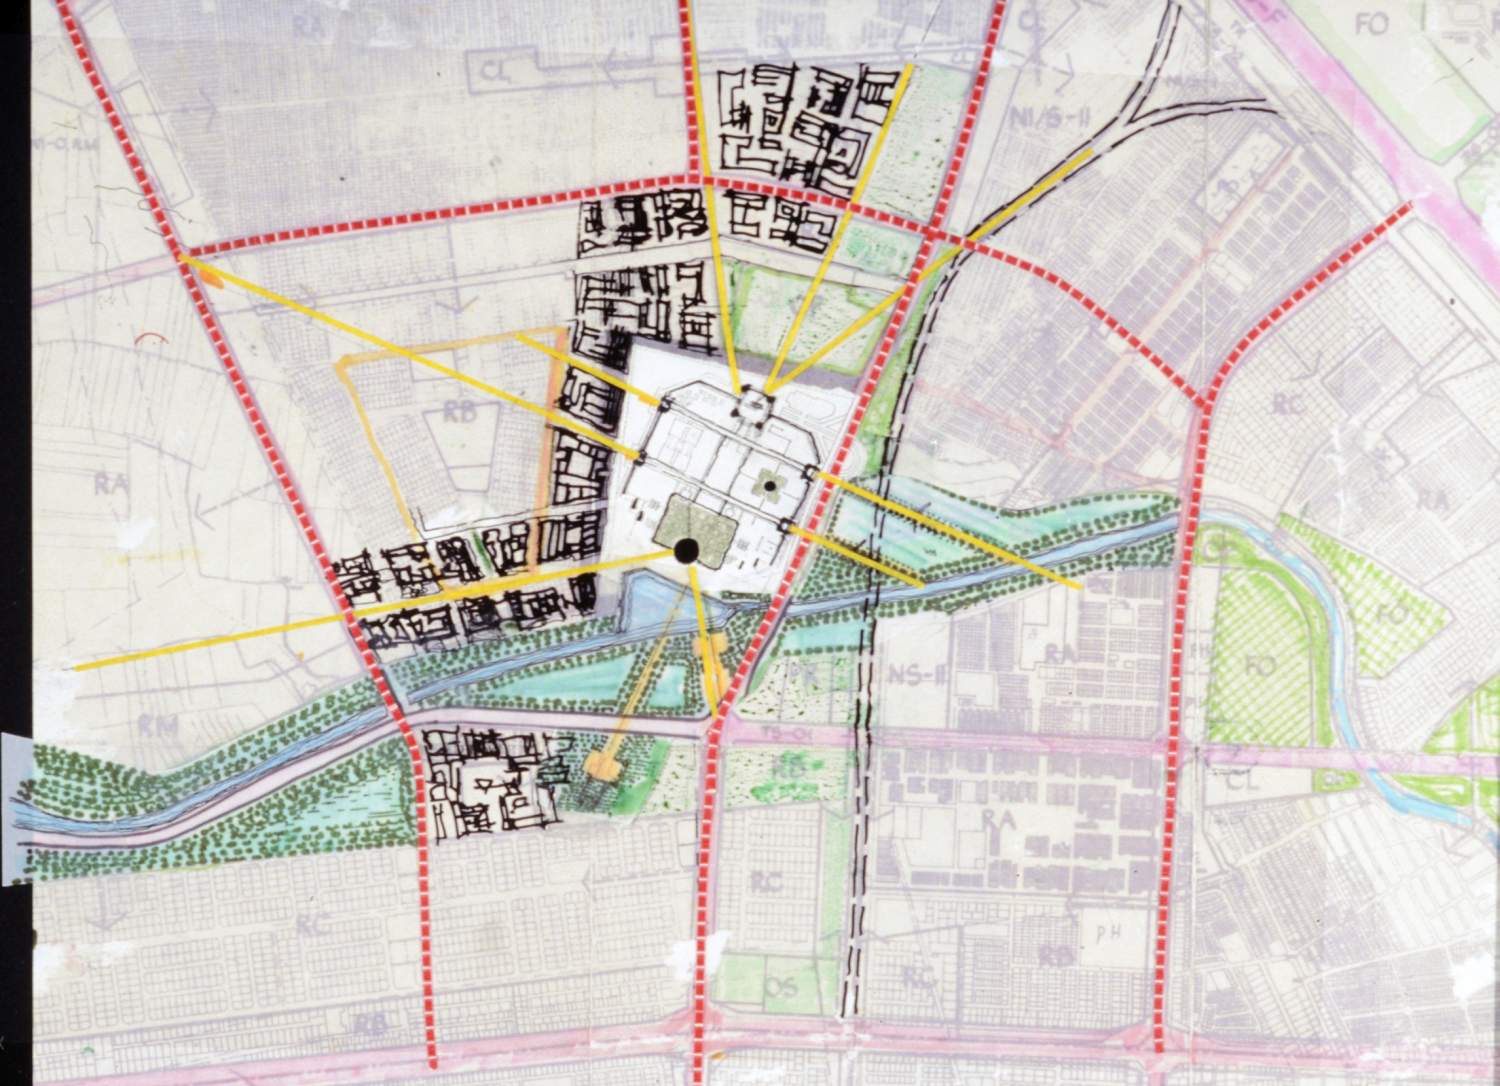 Site plan rendering of mosque and adjacent roads and features on translucent ground, over intended location showing mosque on map of Baghdad neighborhoods.